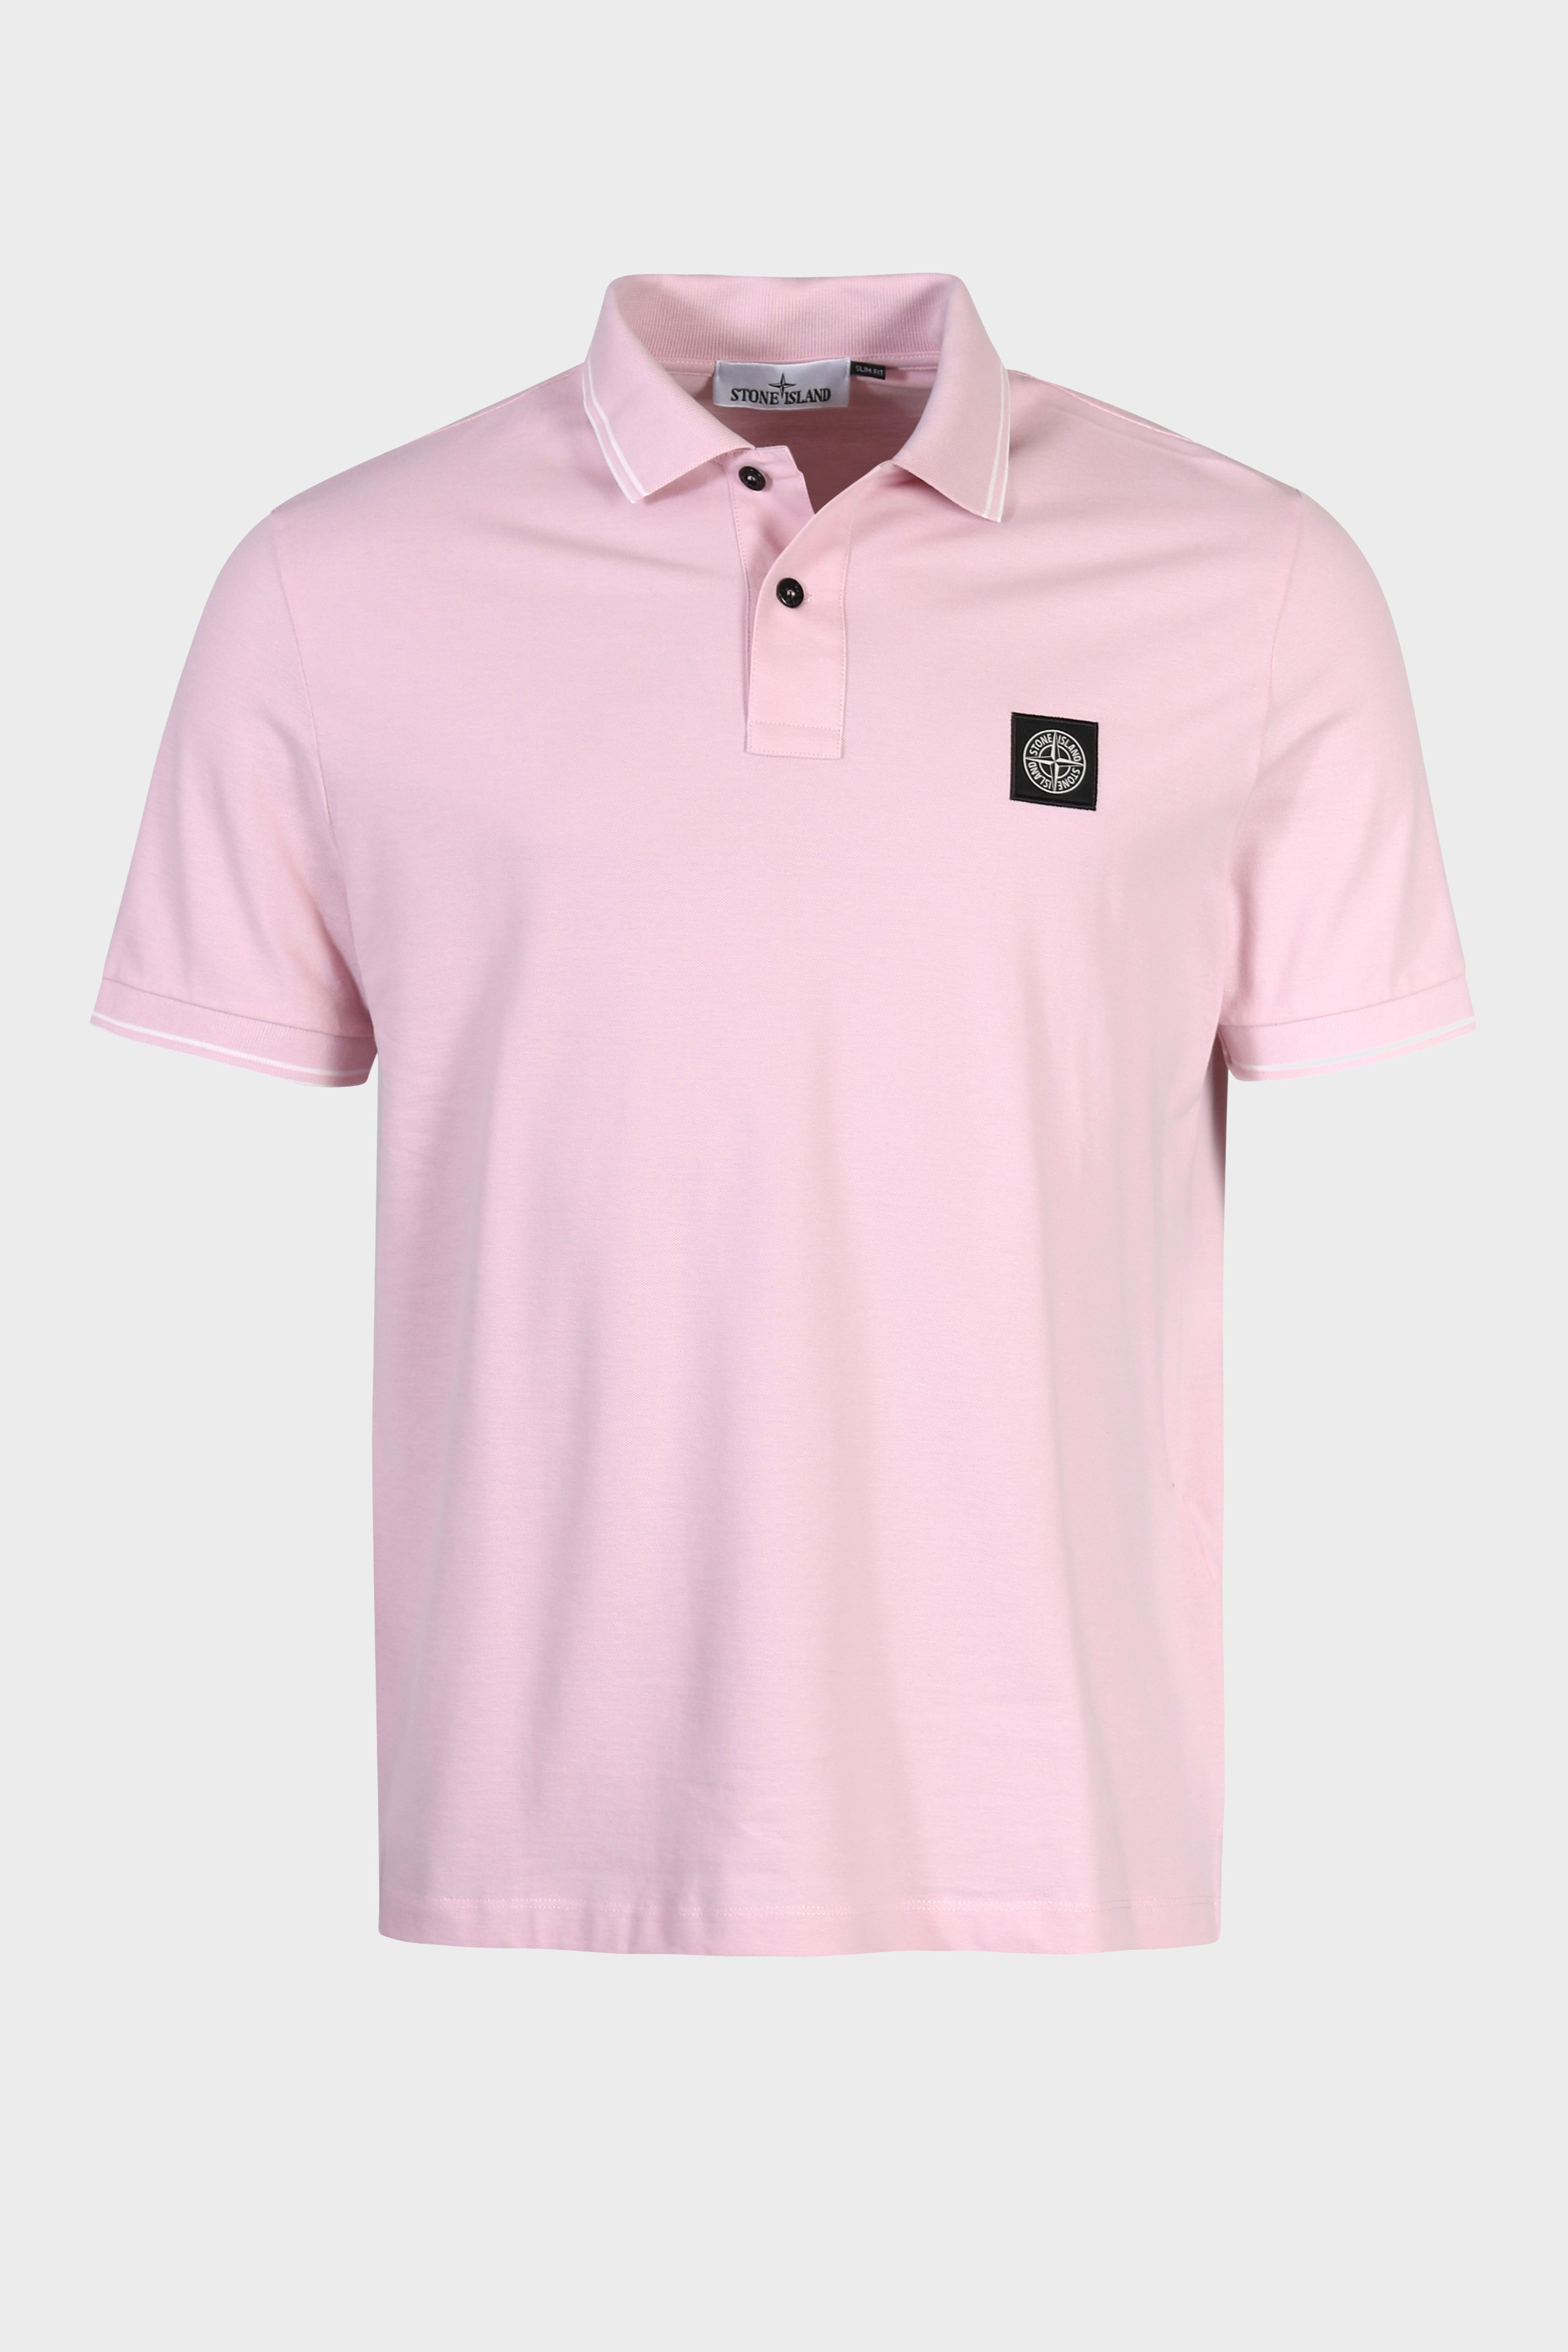 STONE ISLAND Slim Fit Polo Shirt in Light Pink M